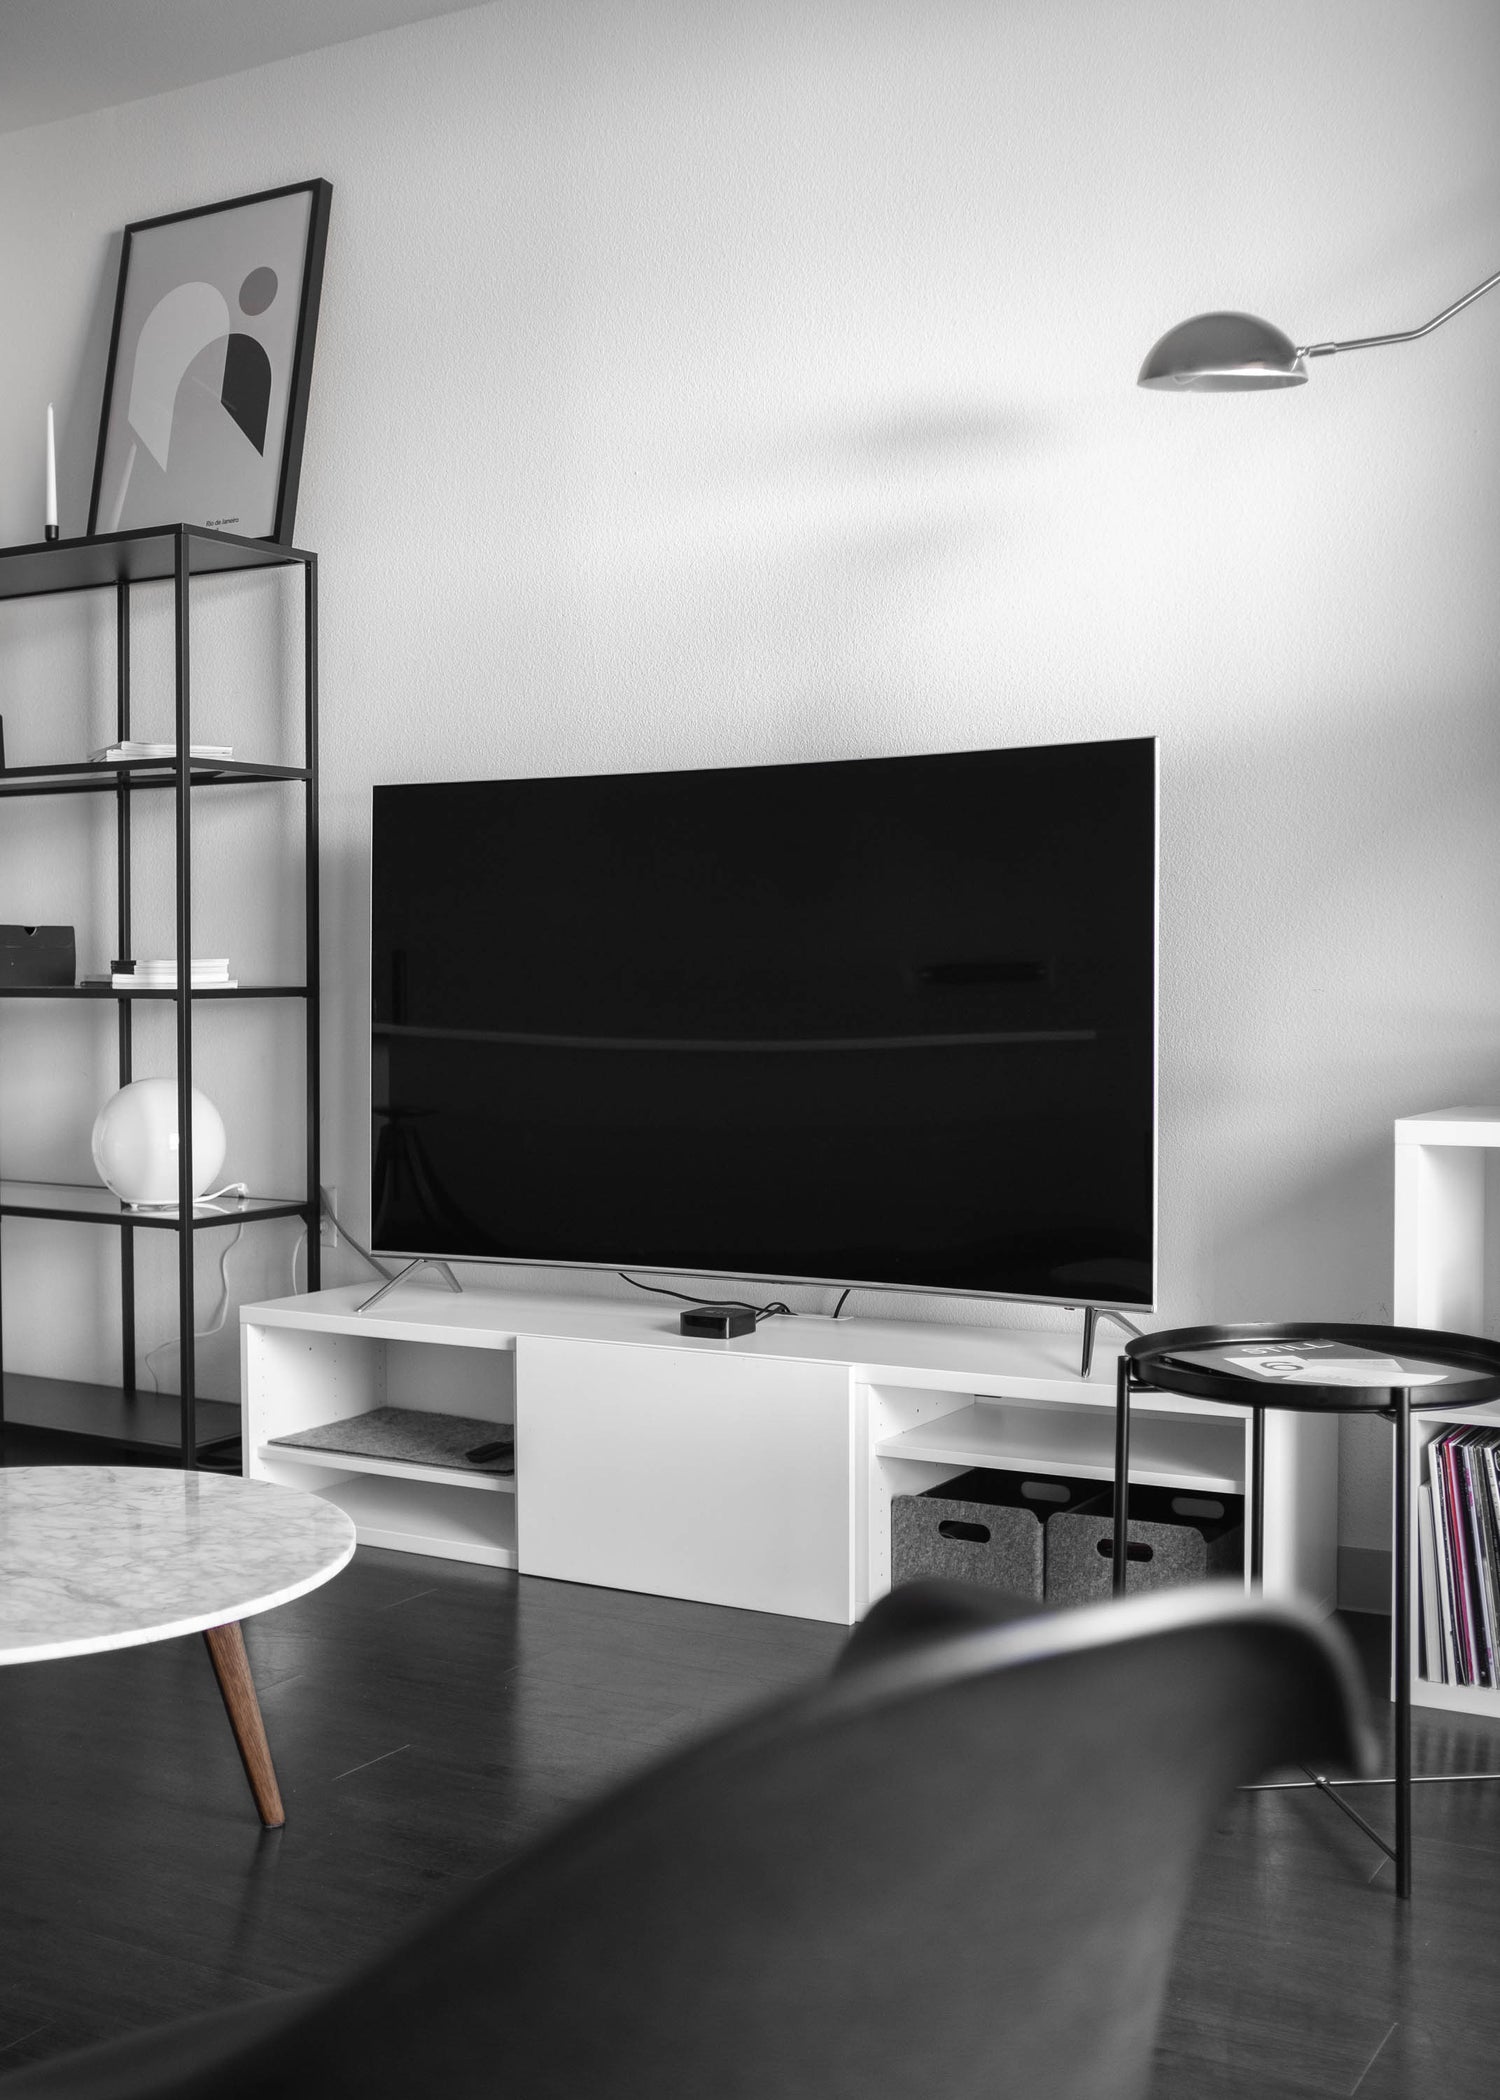 A monochromatic living room featuring a flat-screen TV on a white stand, with a minimalist metal shelving unit and modern decor in the background.